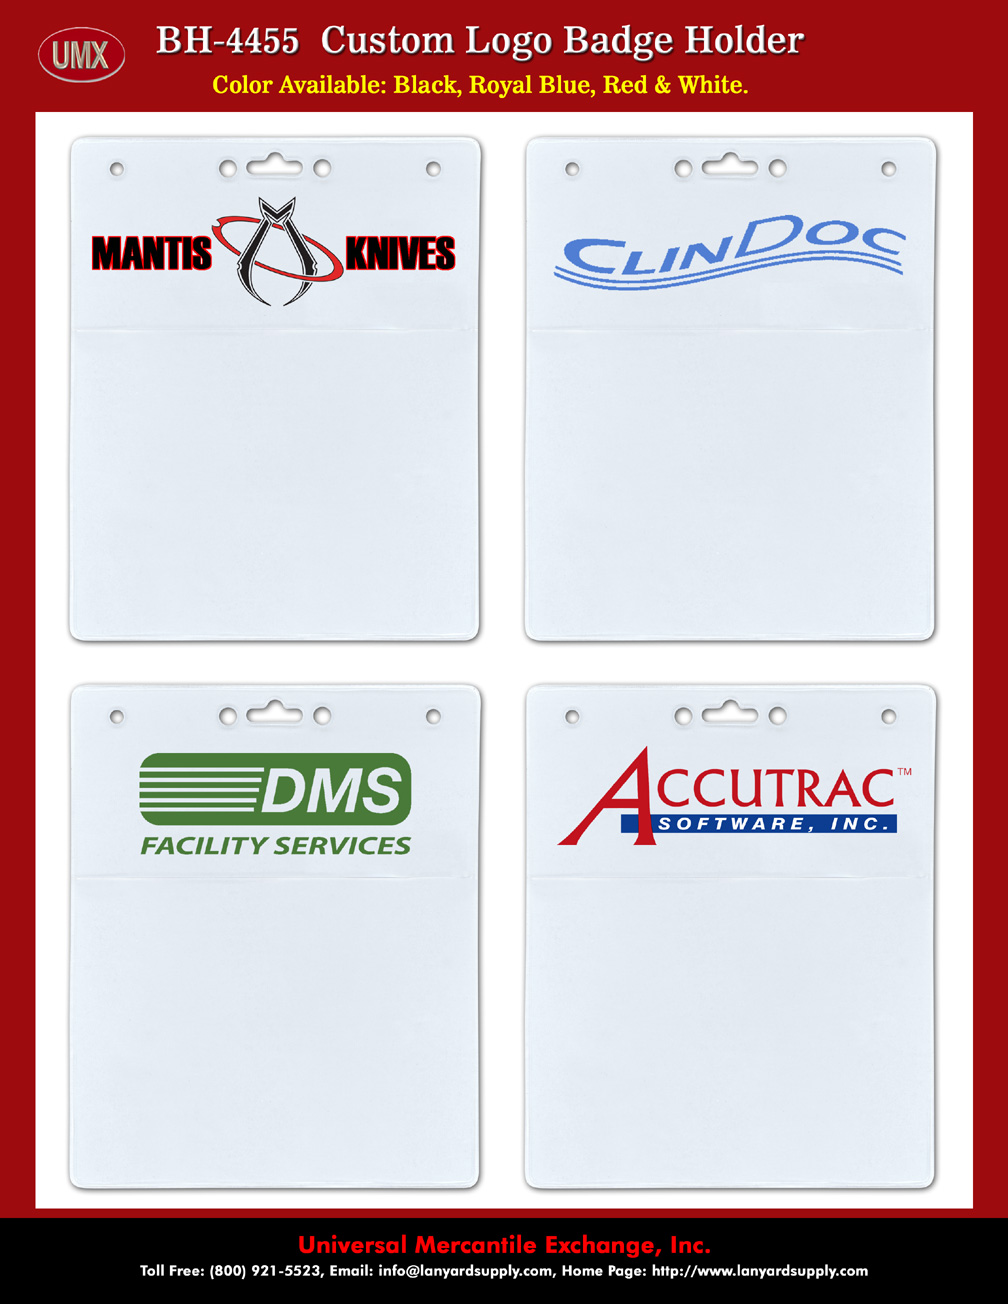 Custom Imprinted Business Name Card Holders With White Color Background.